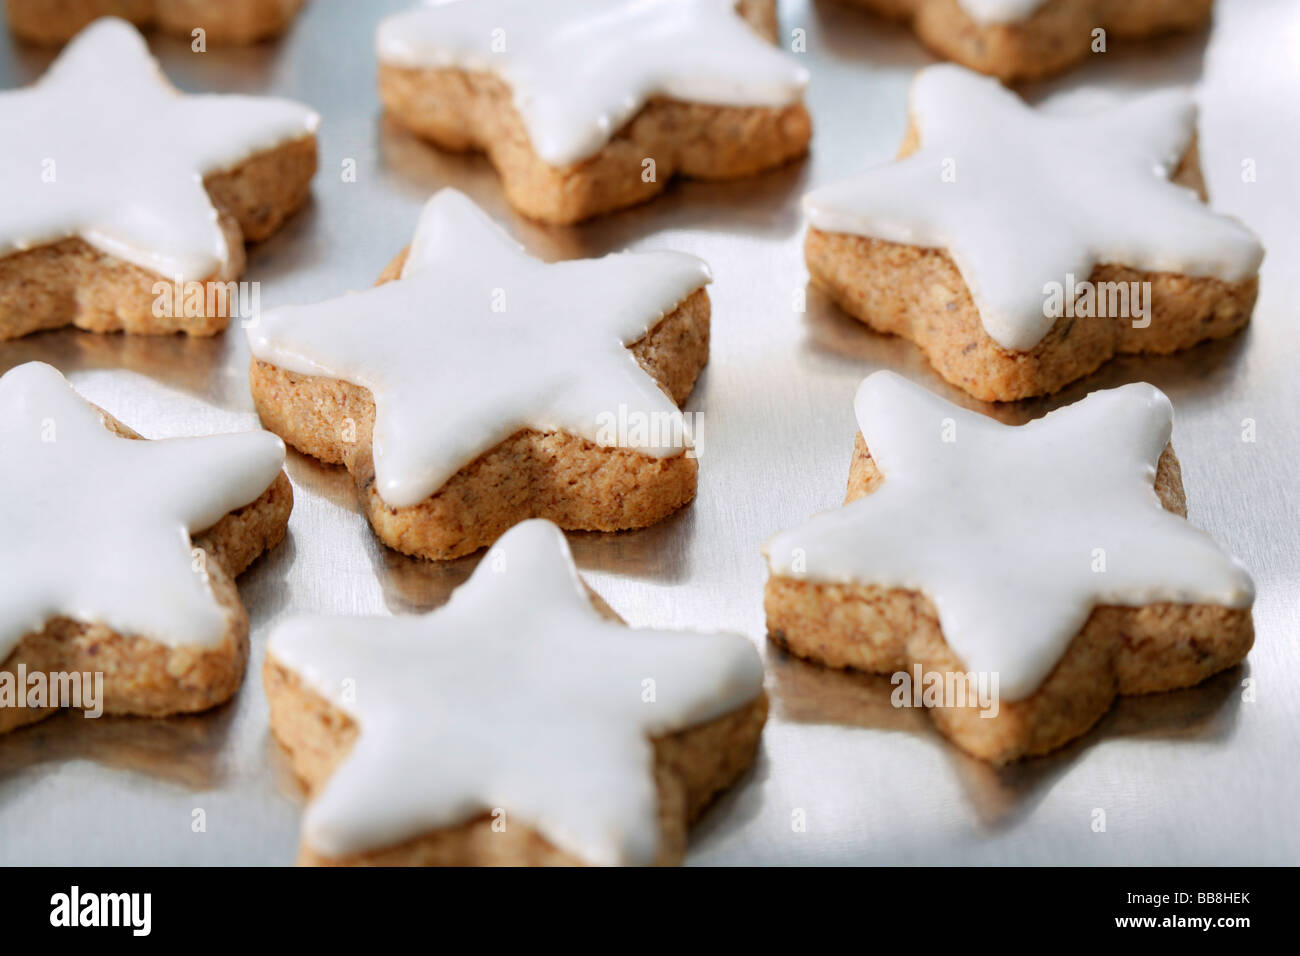 Star shaped cinnamon biscuit Stock Photo